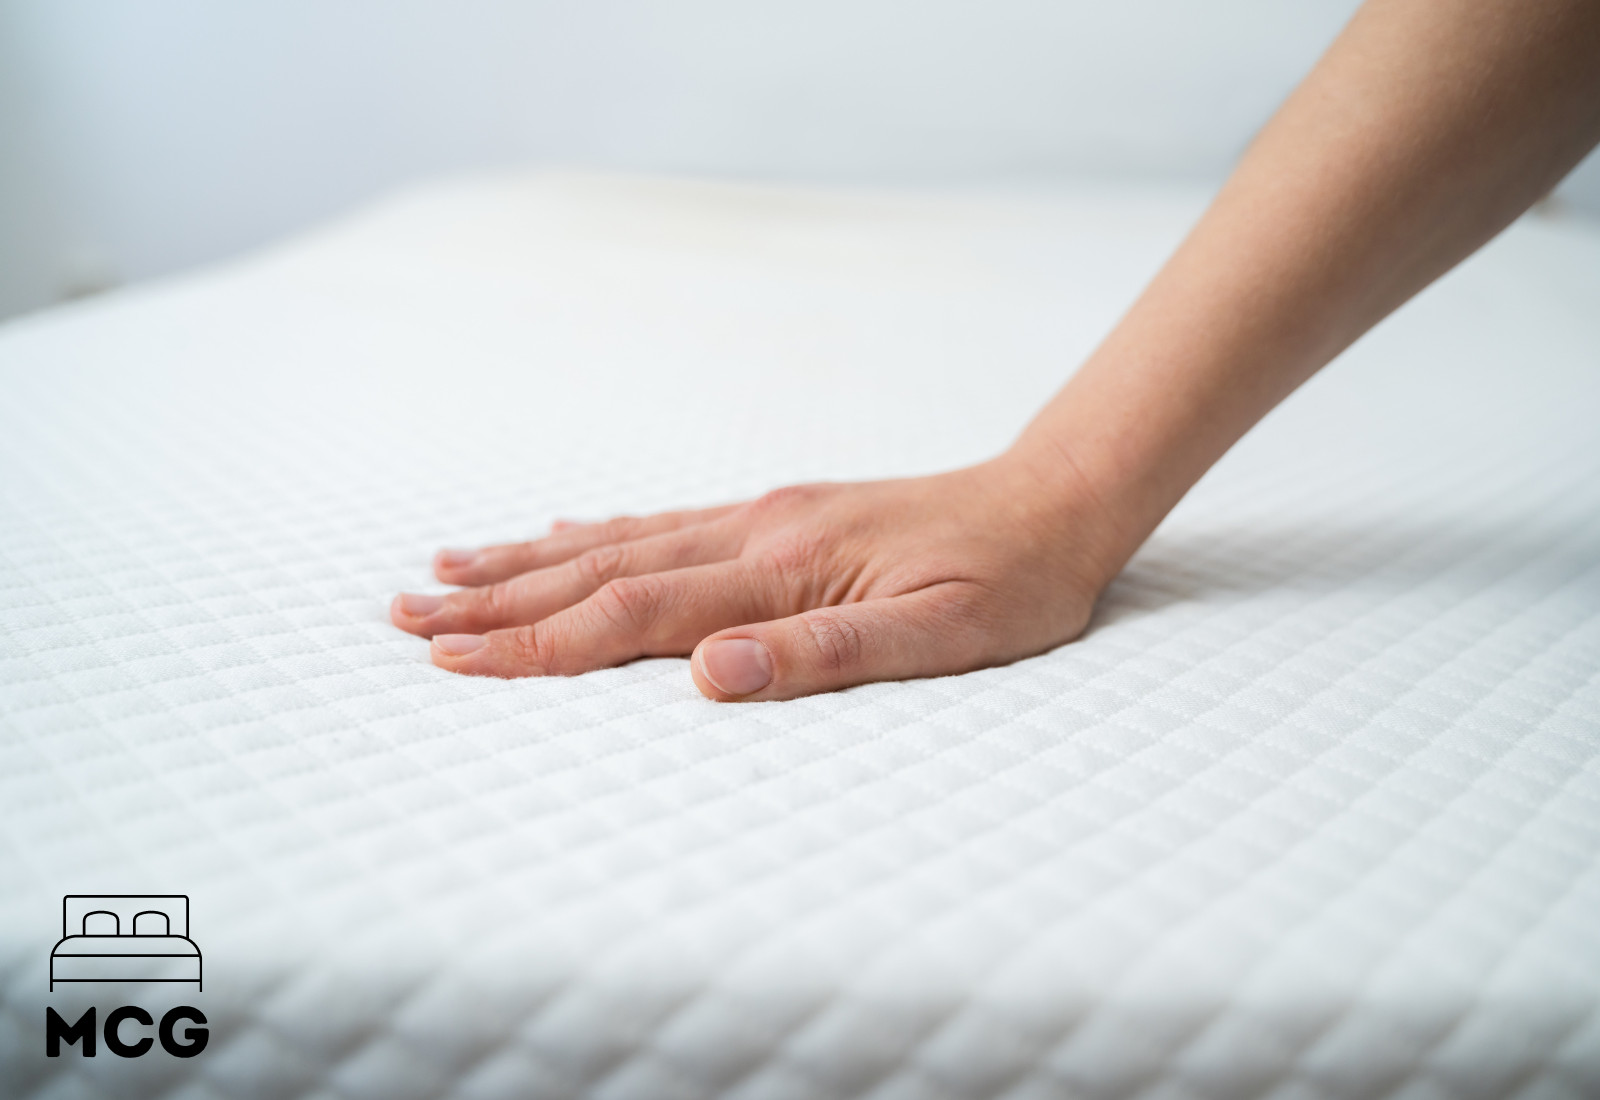 picture of a hand on a mattress